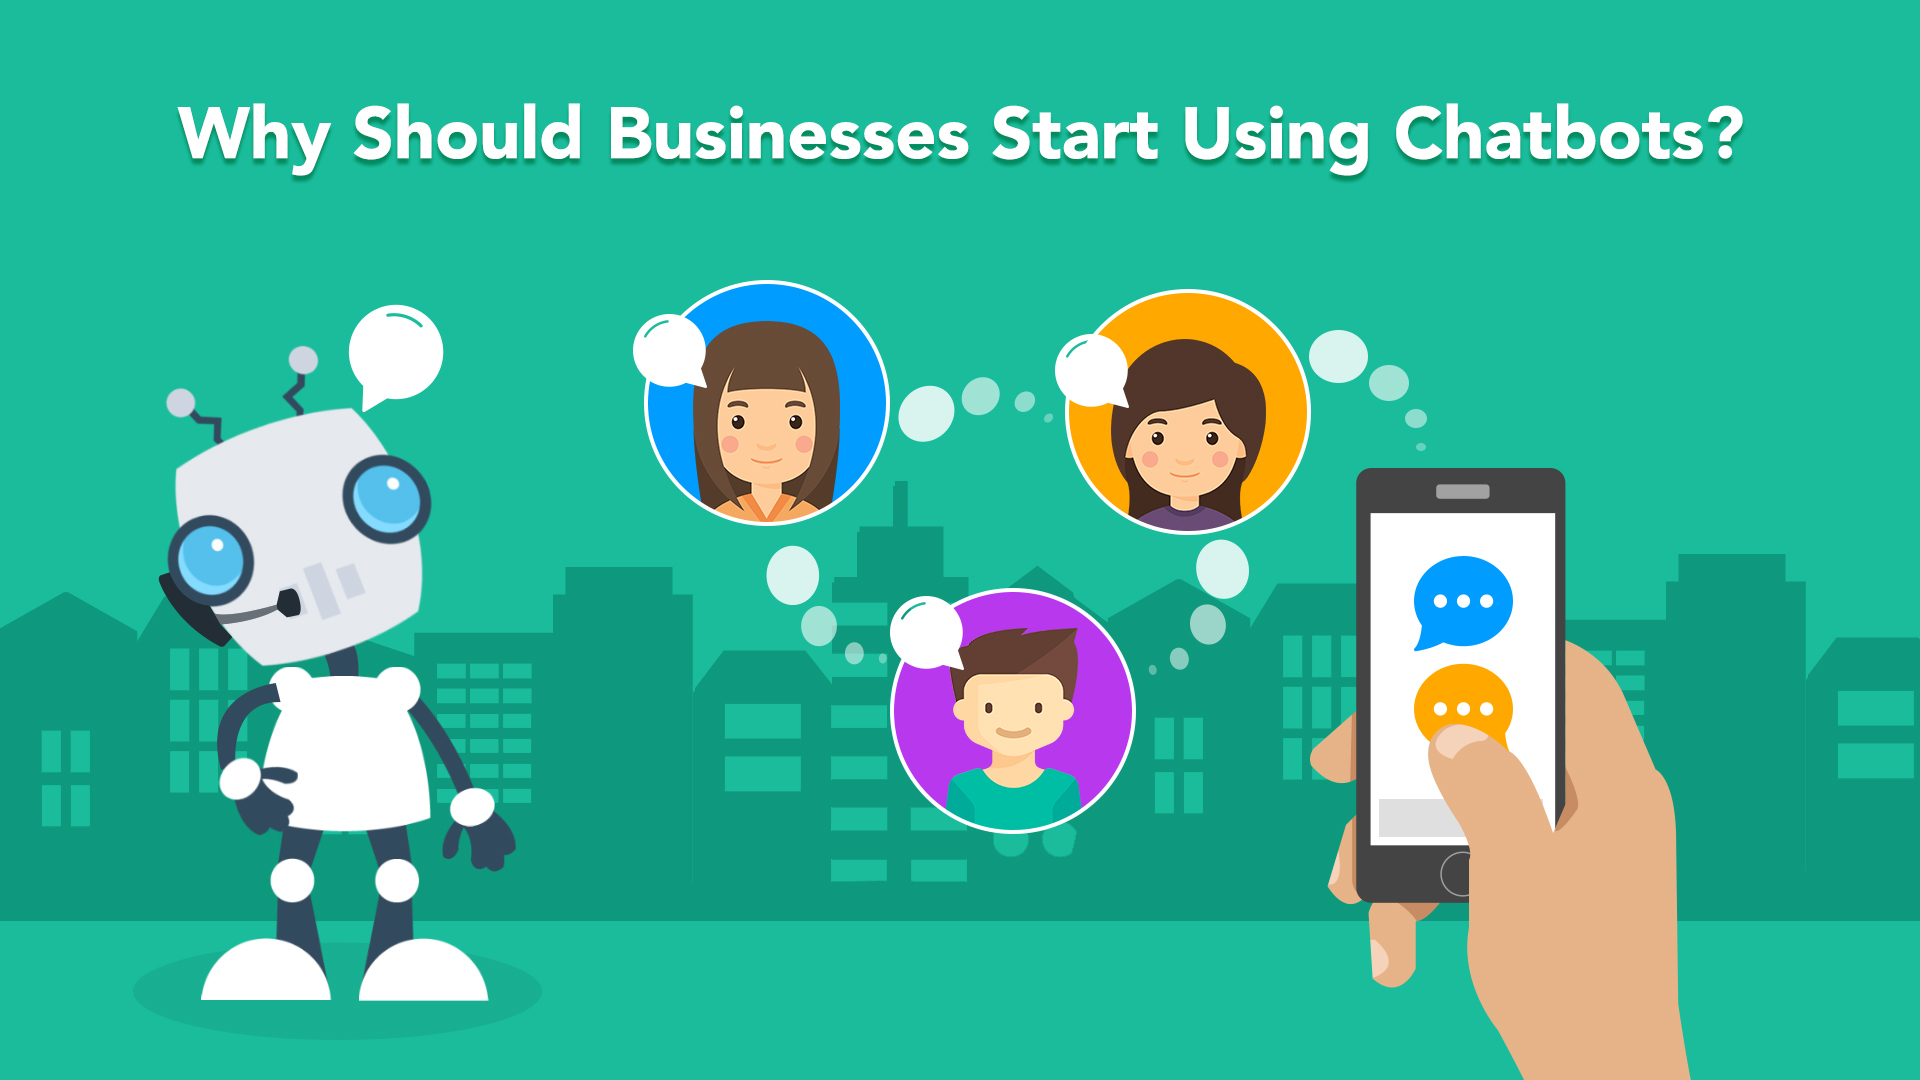 Why Should Businesses Start Using Chatbots?